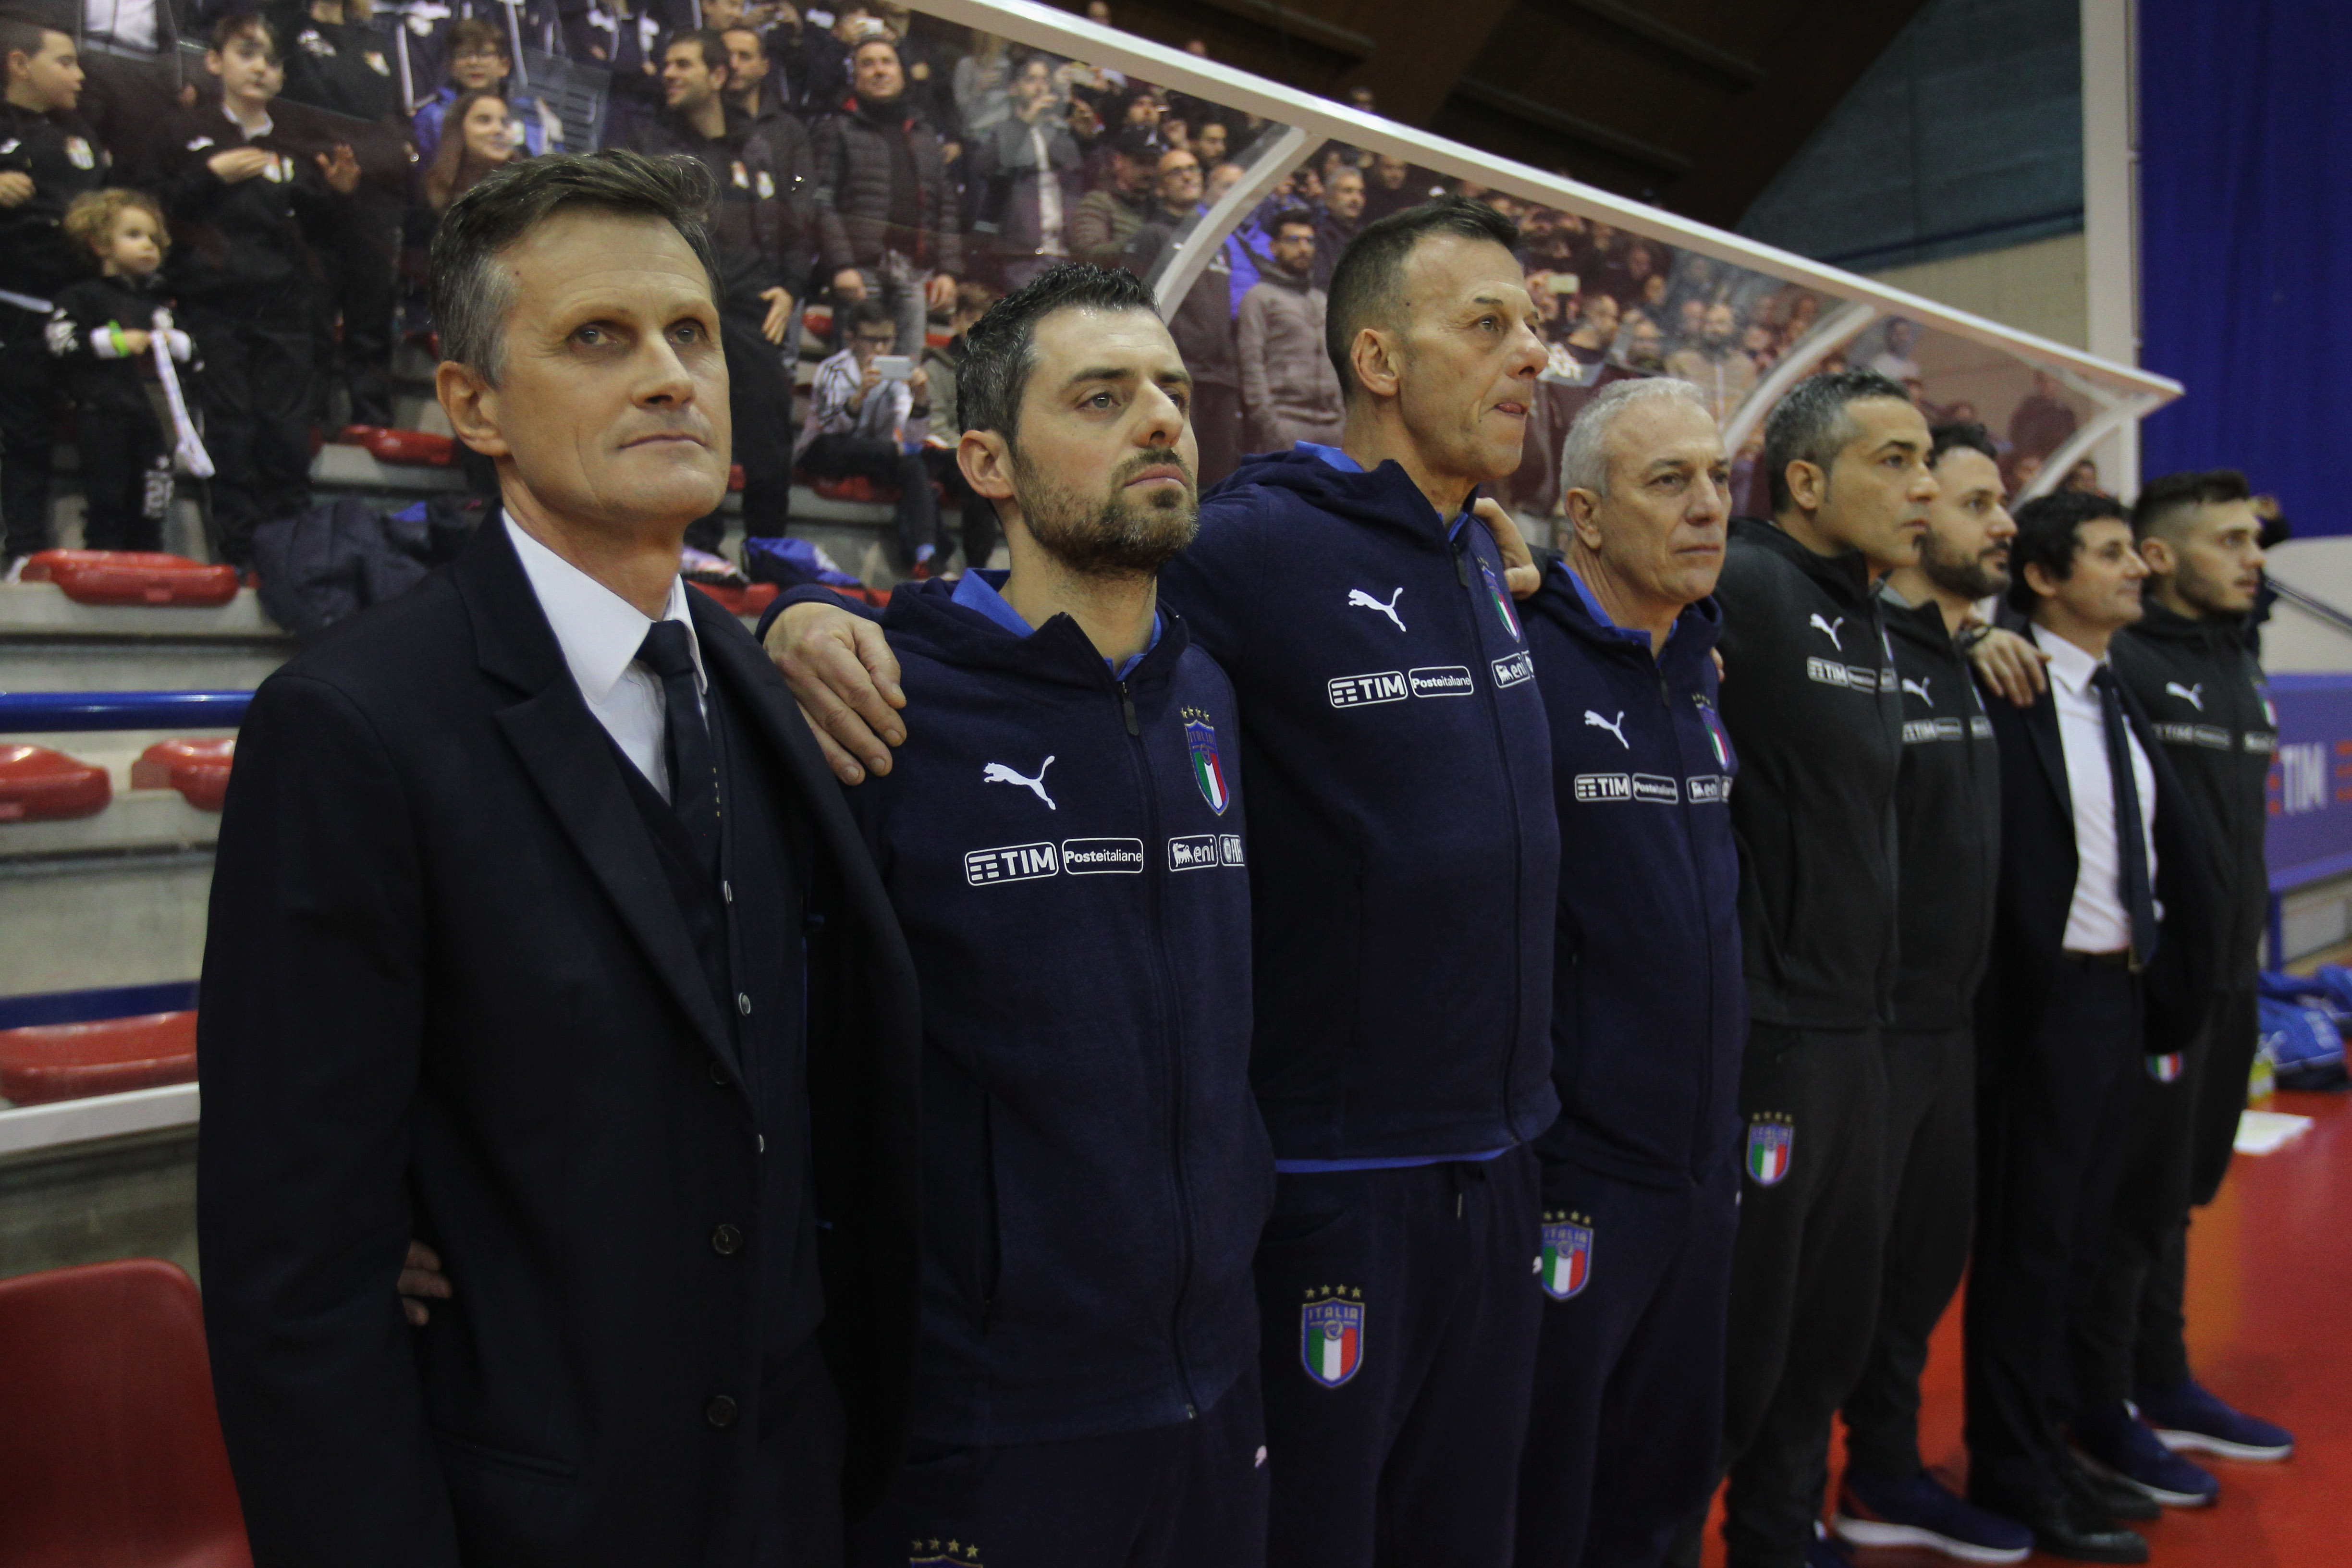 GENZANO DI ROMA, ITALY - JANUARY 22:  Italy head coach Roberto Menichelli looks on during the Futsal International Friendly match between Italy and Poland on January 22, 2018 in Genzano di Roma, Italy.  (Photo by Paolo Bruno/Getty Images)